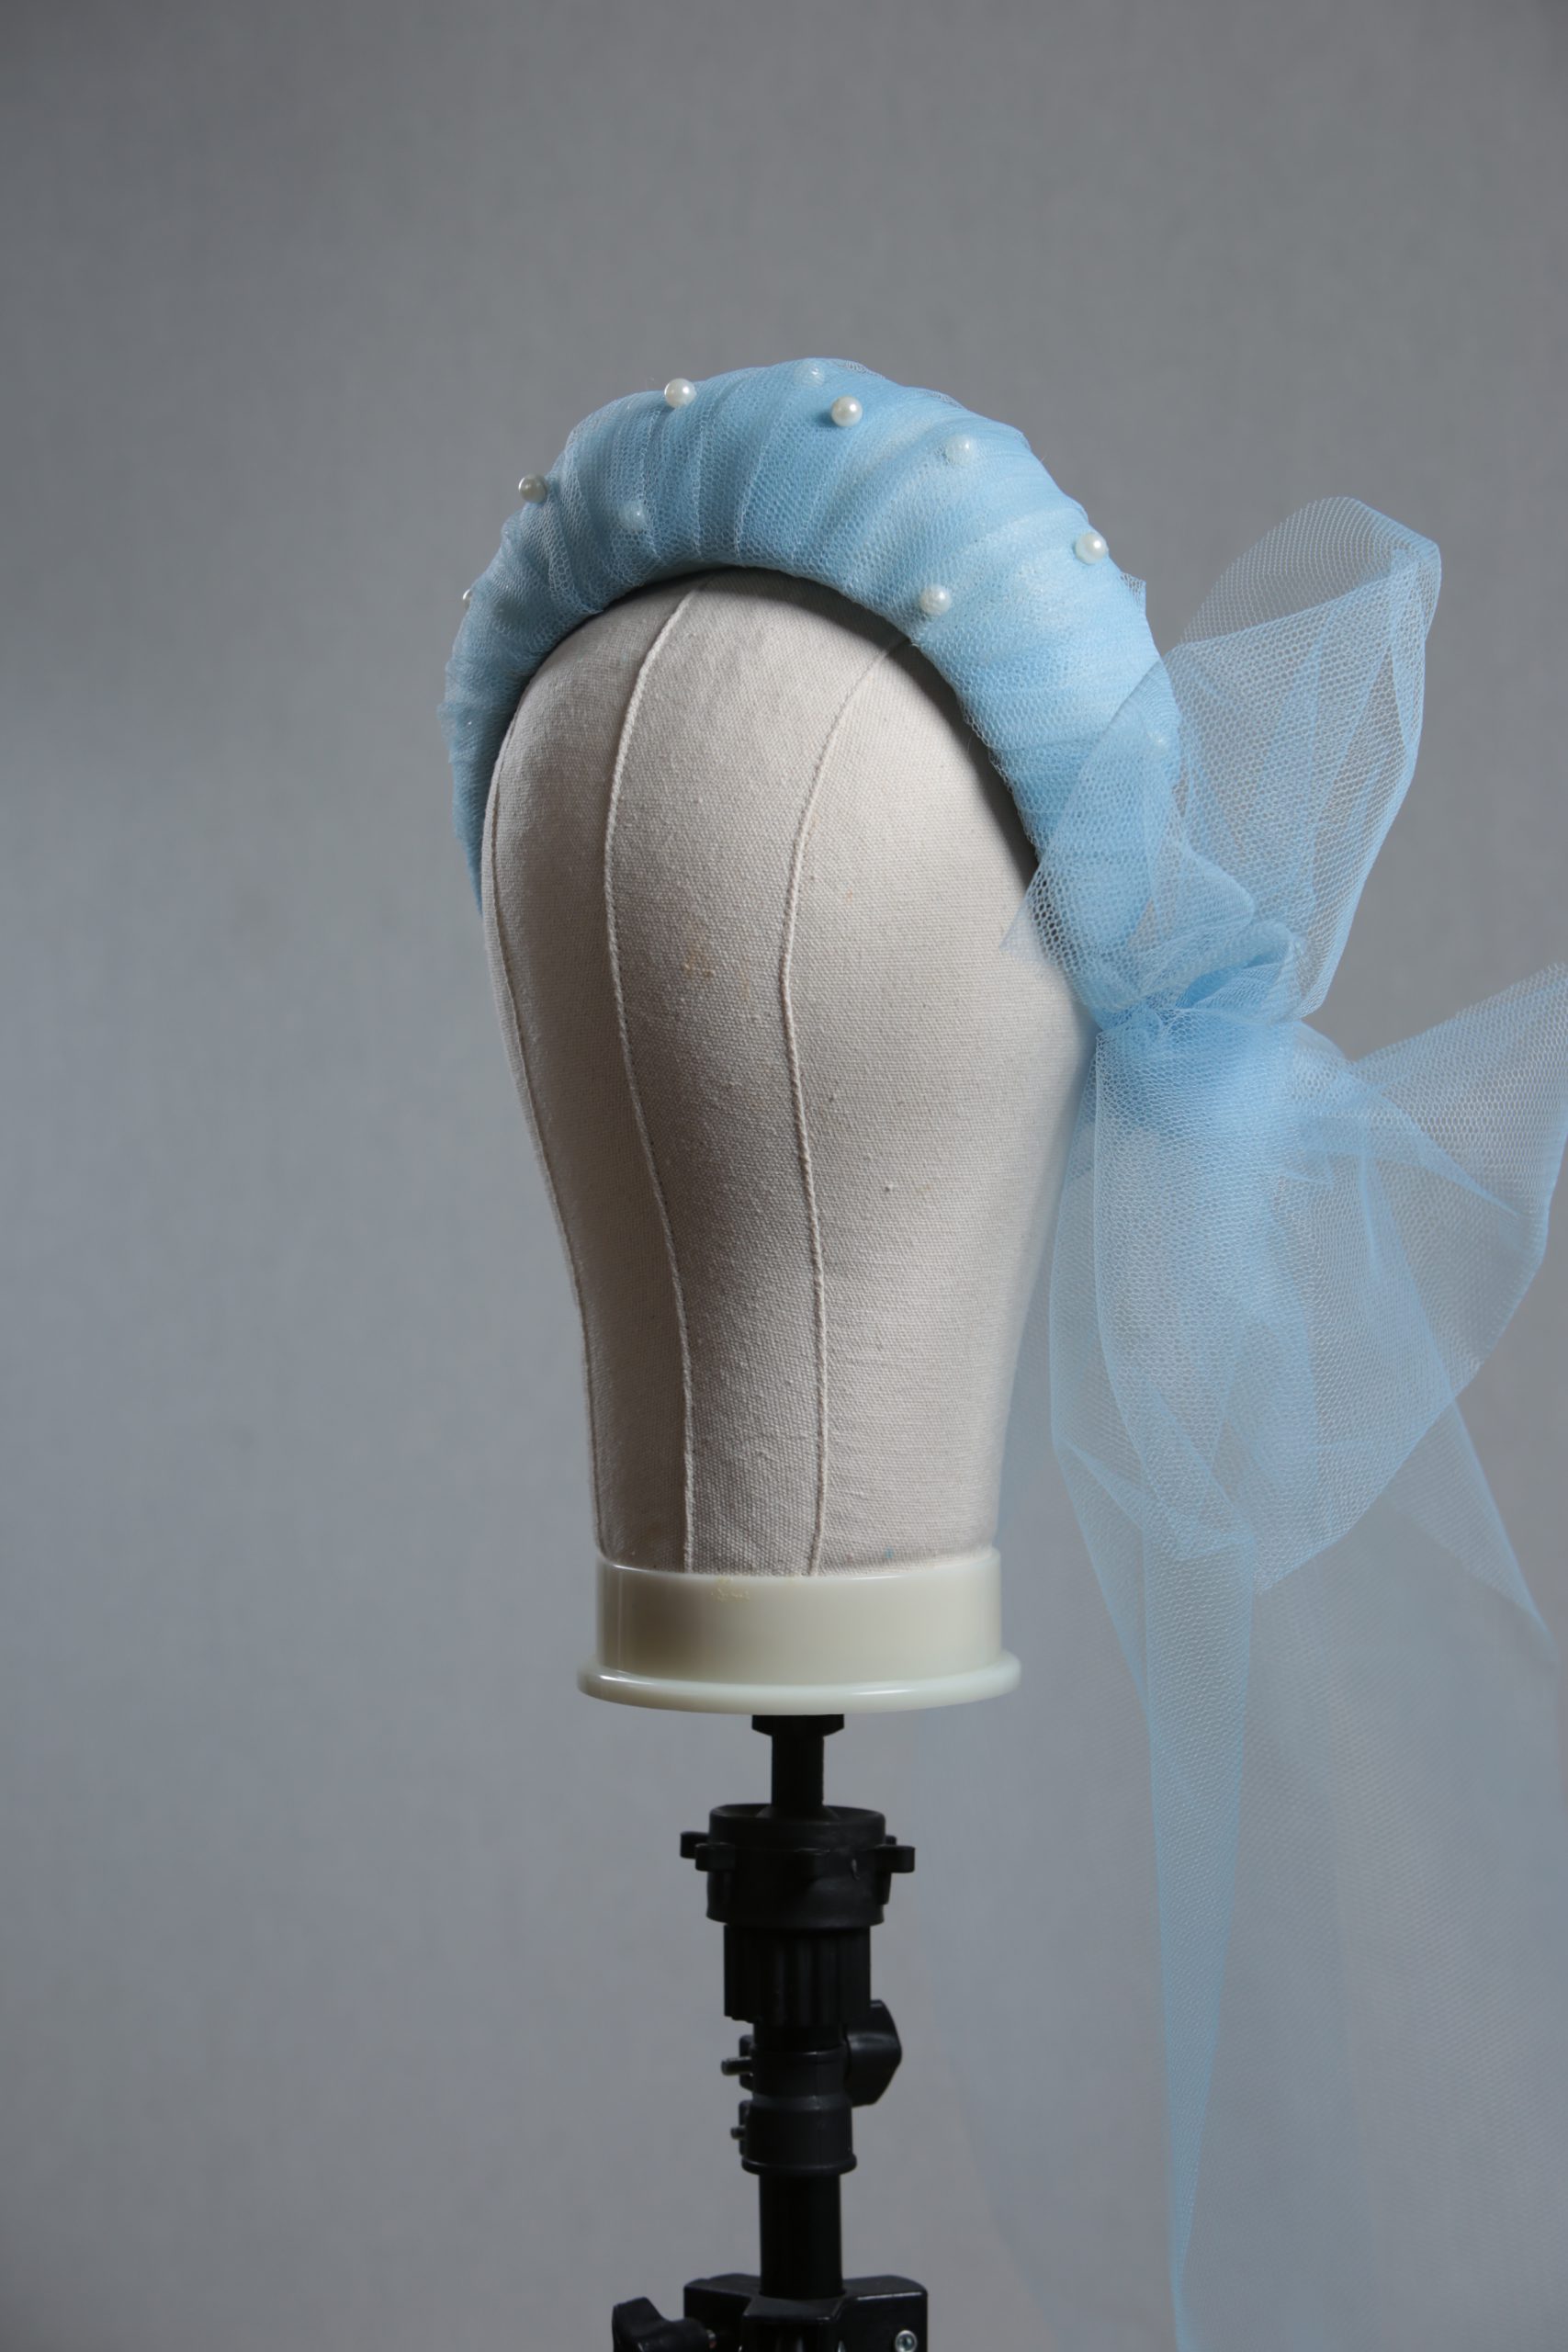 Ladies wedding or races baby blue tulle headband with pearls and bow fascinator